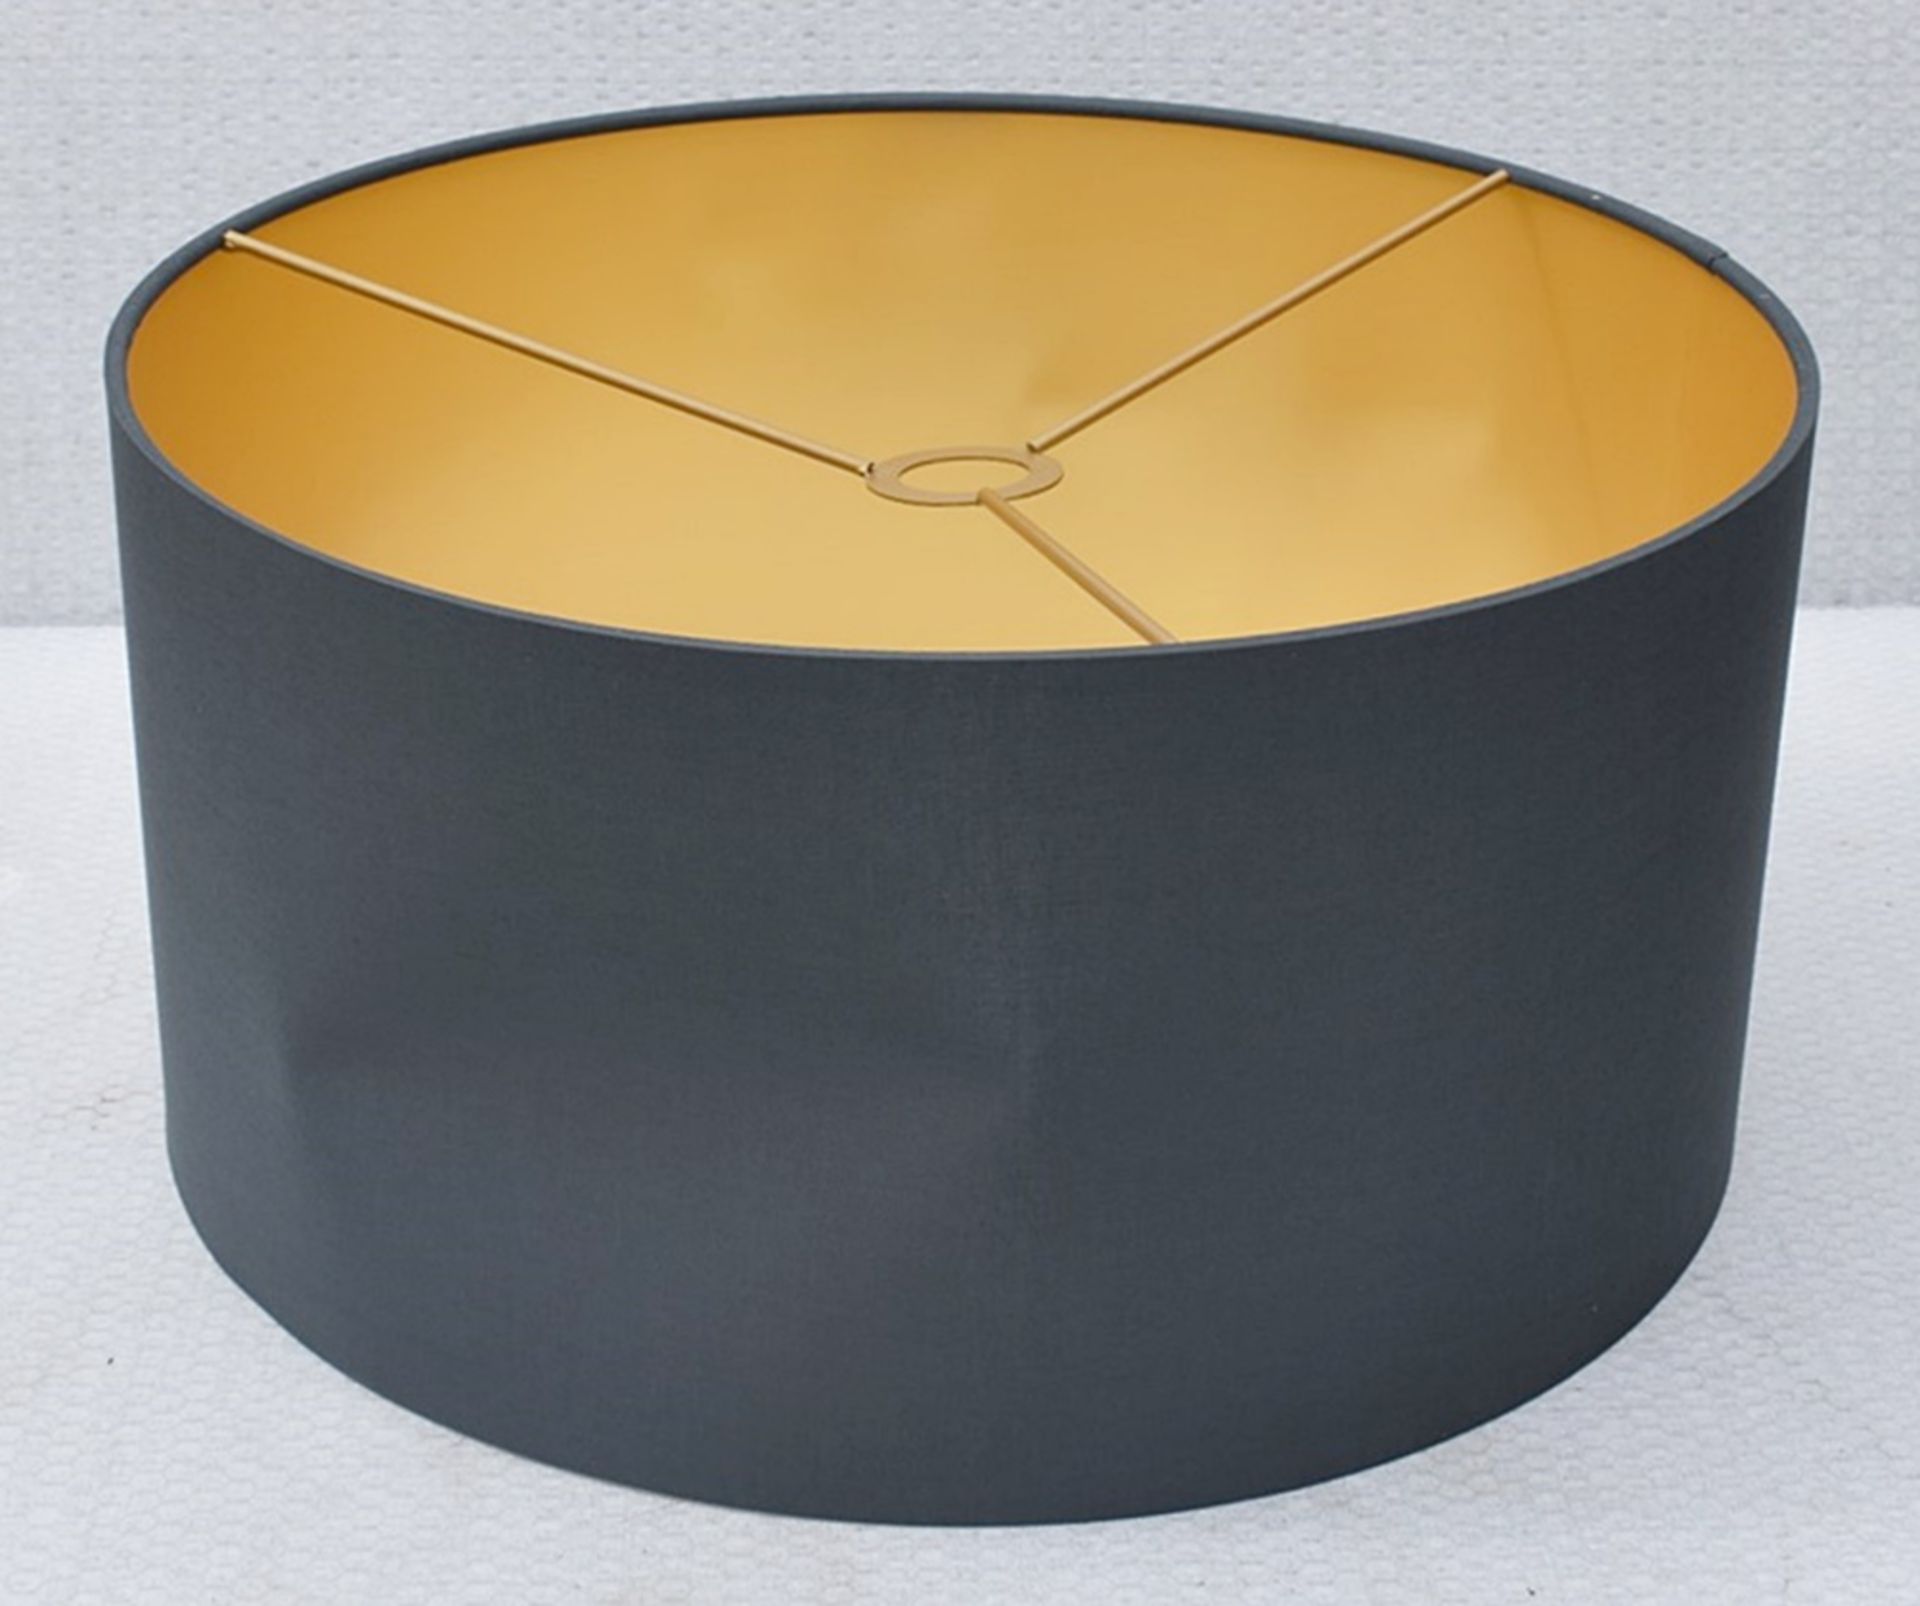 1 x PORADA 'Gary' Designer Floor Lamp Cotton Drum Shade In Charcoal and Gold - Unused Boxed - Image 3 of 5